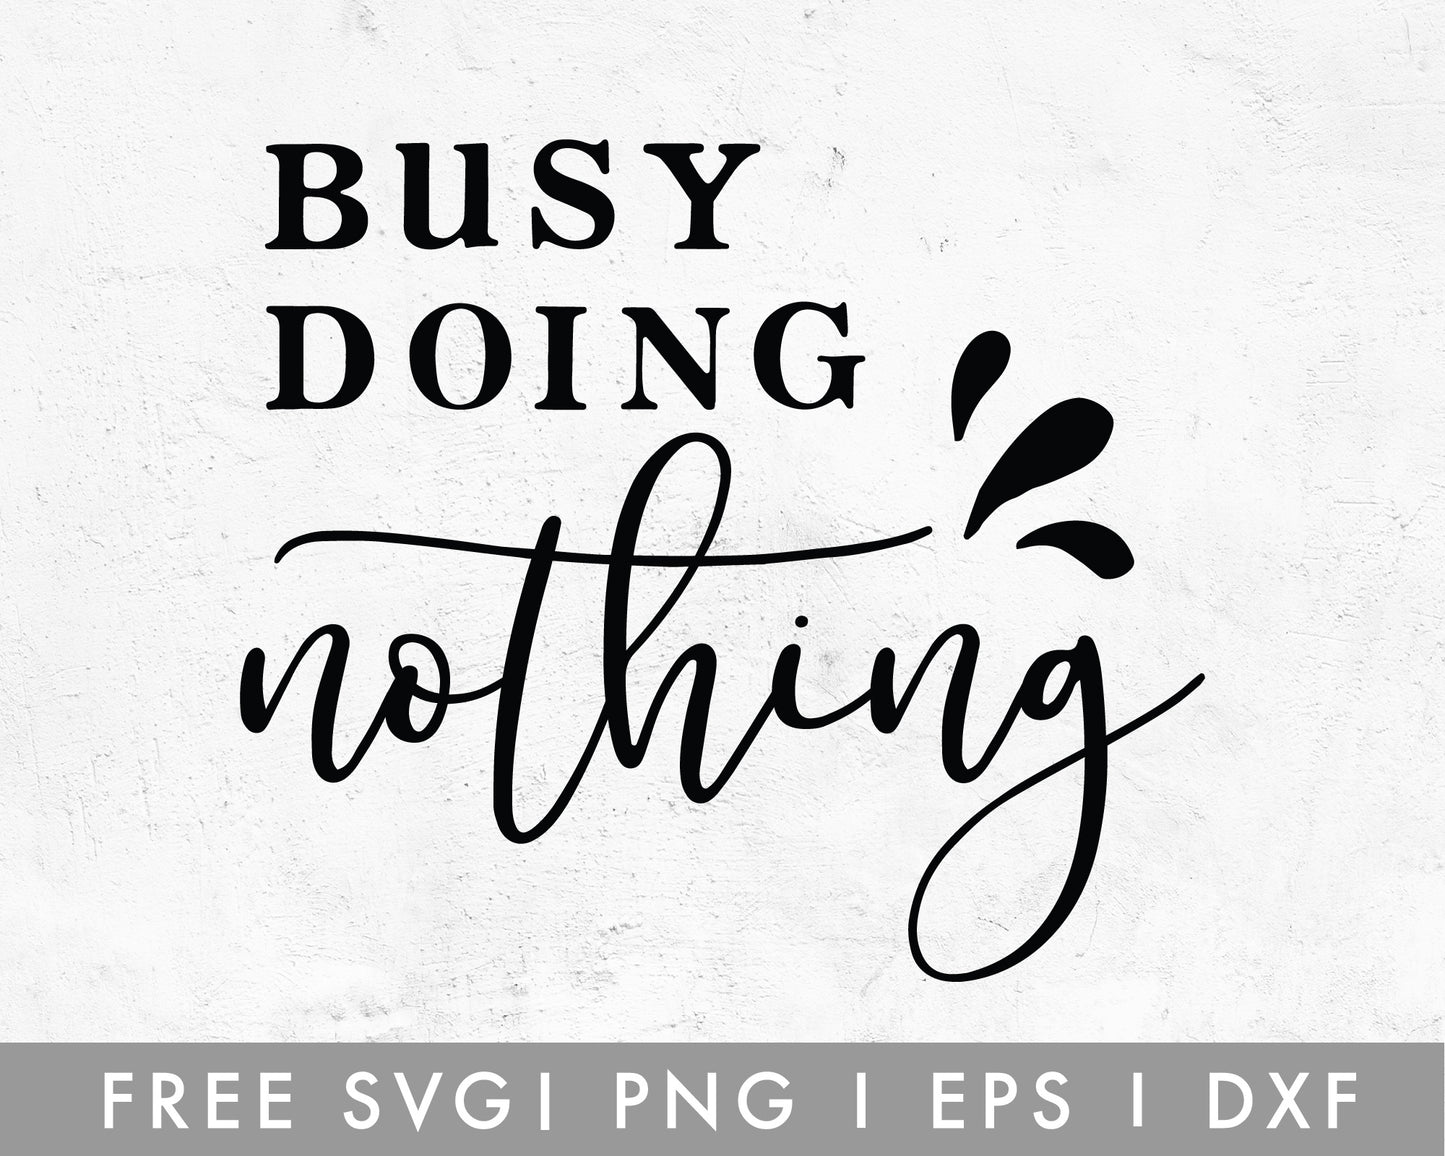 FREE Busy Doing Nothing SVG Cut File for Cricut, Cameo Silhouette | Free SVG Cut File